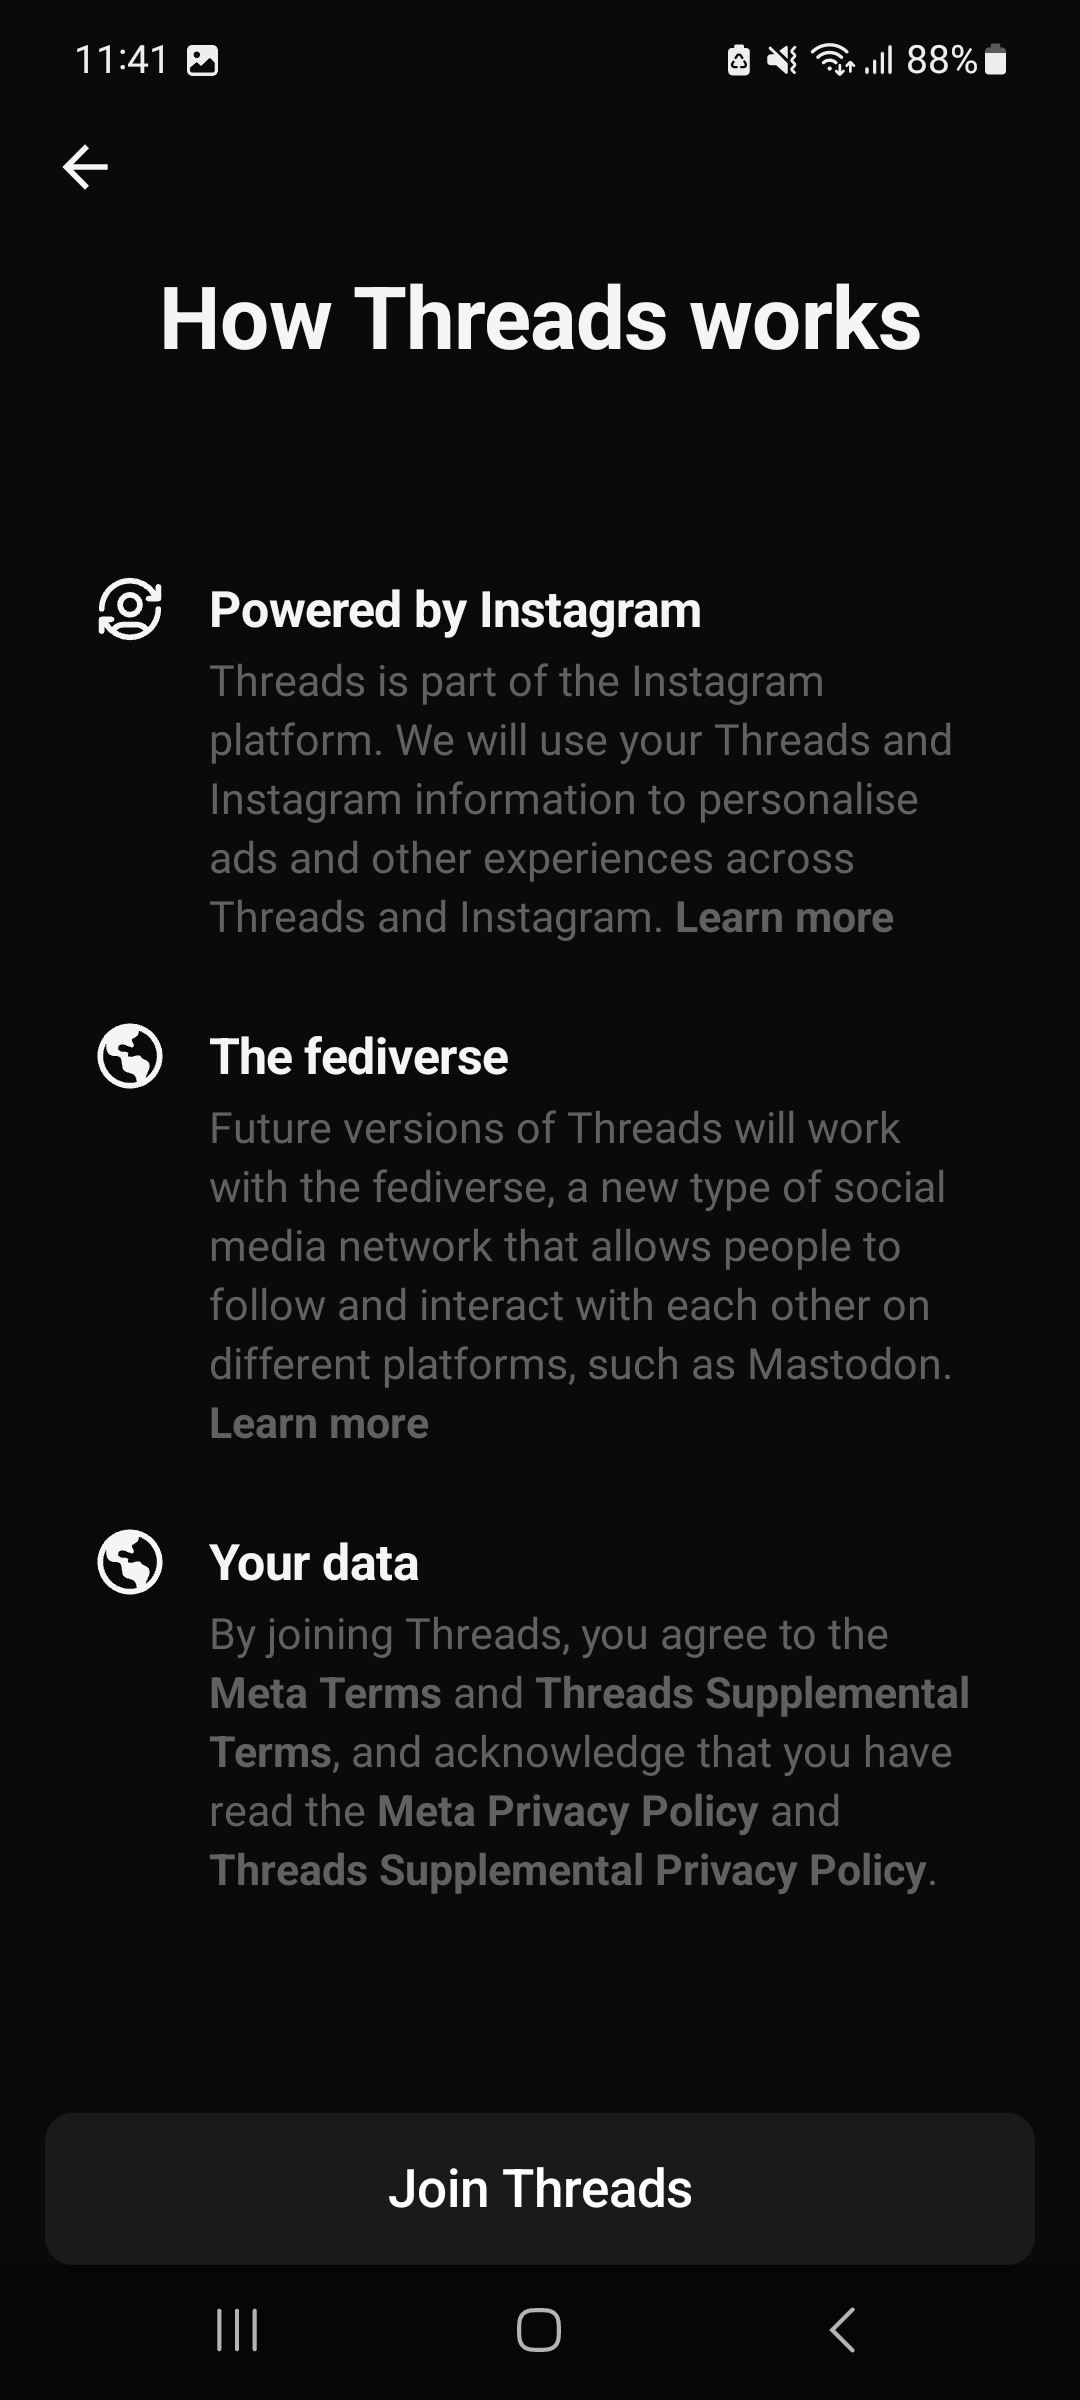 Learn 'How threads works' before joining